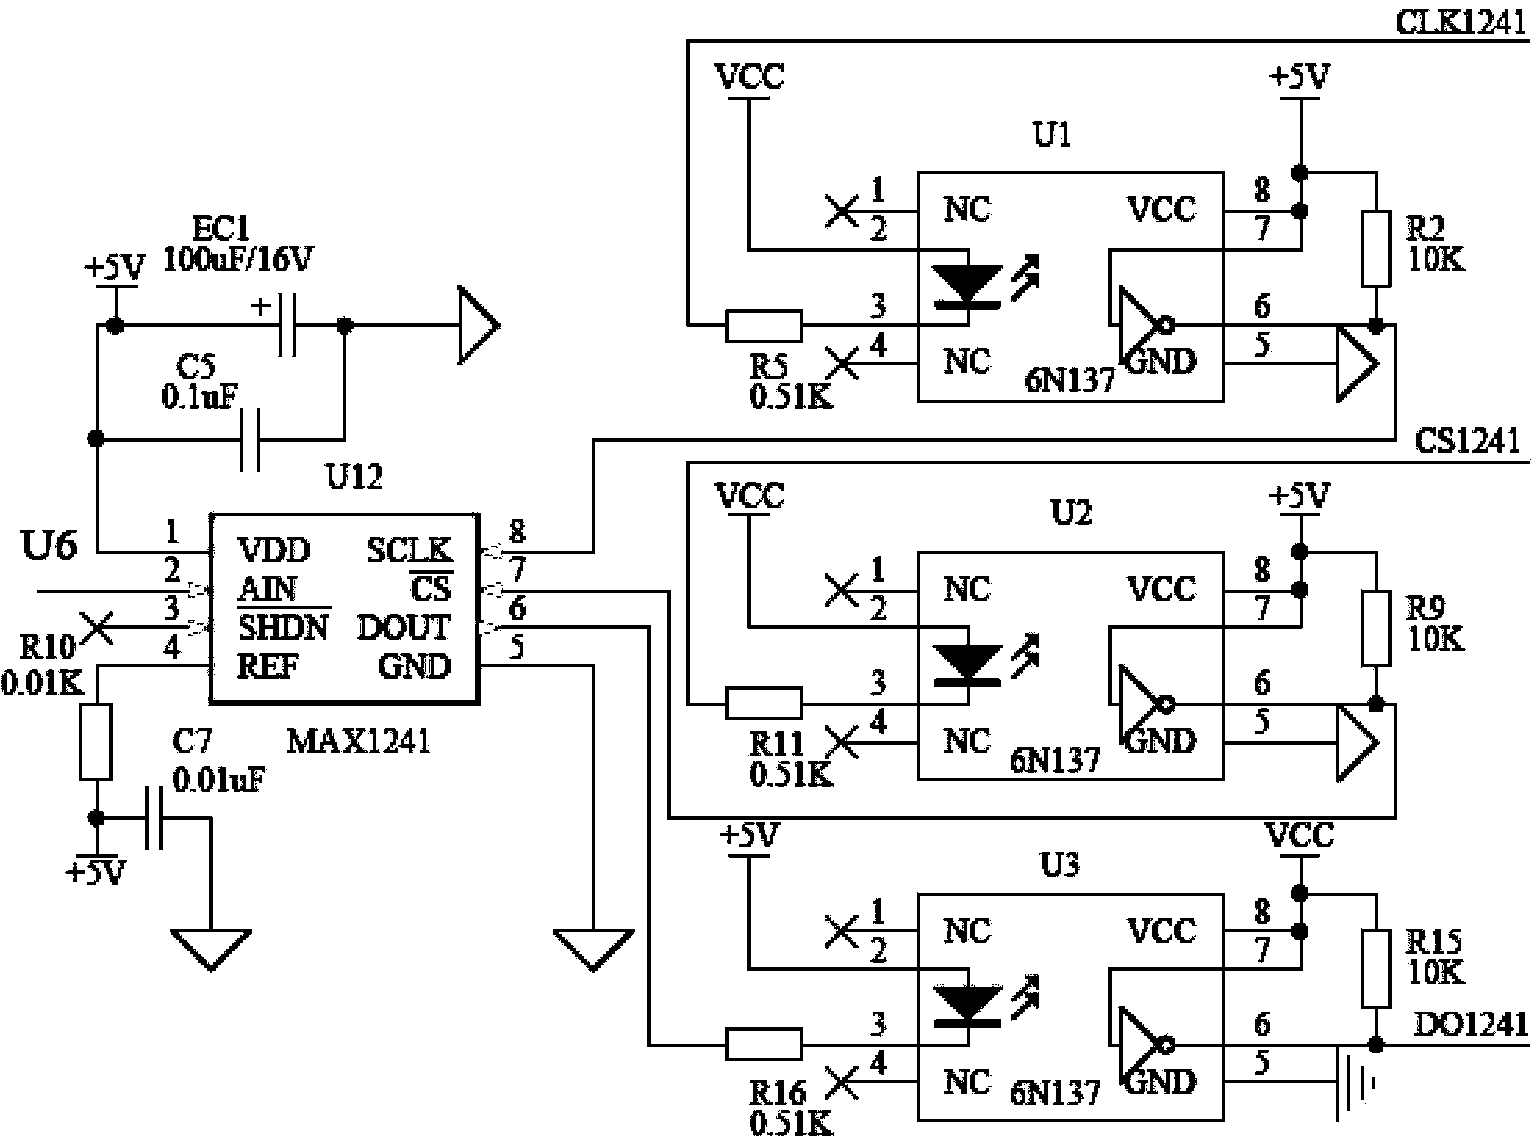 Integrated multifunctional controller for low-power direct-current servomotors